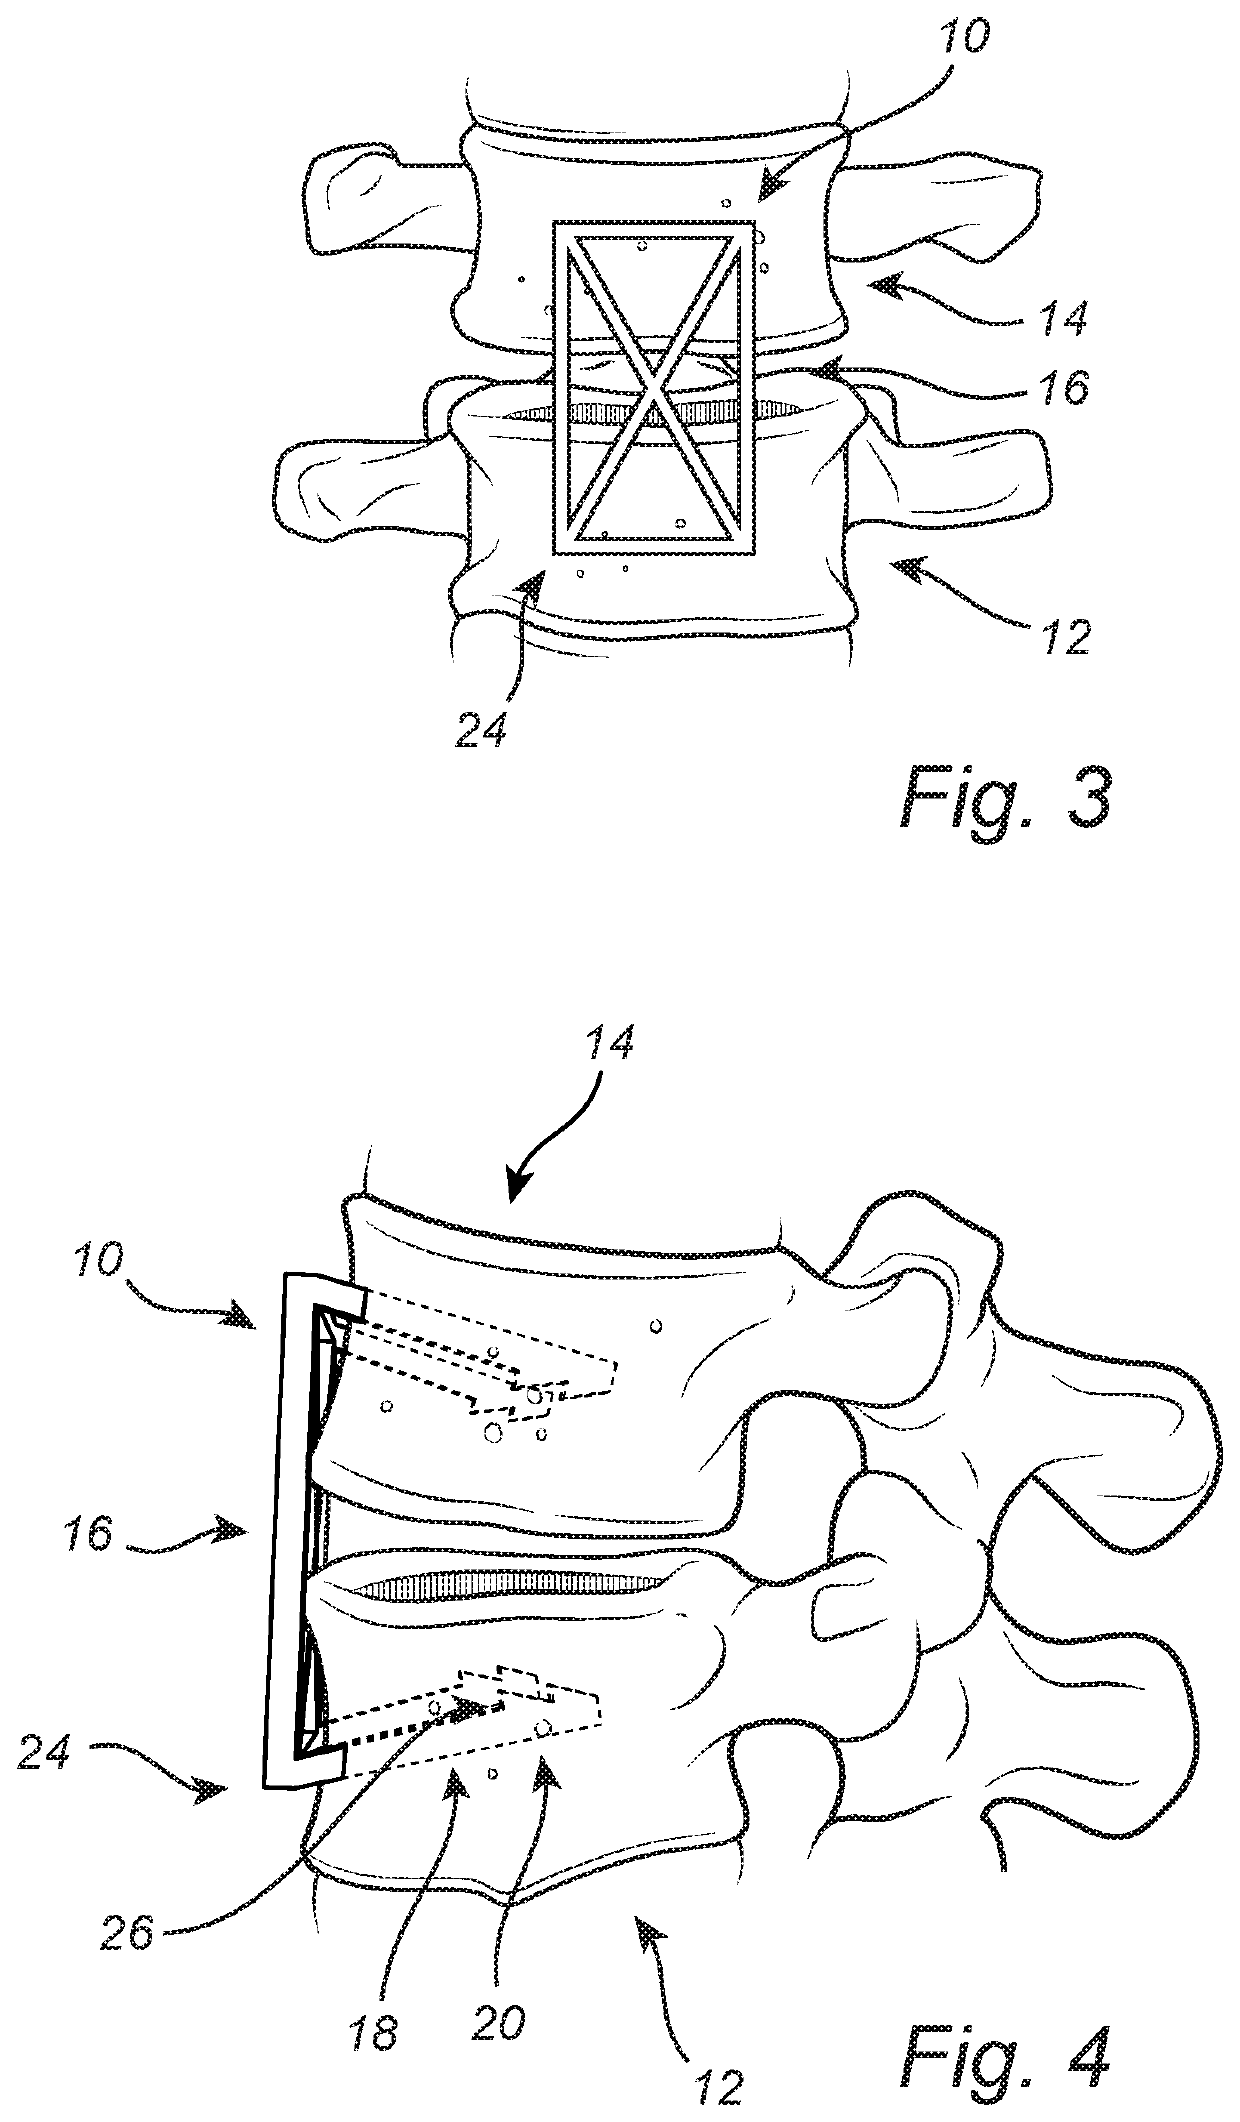 Continuous compression fixation device for the fusion of an intercalary structural augment